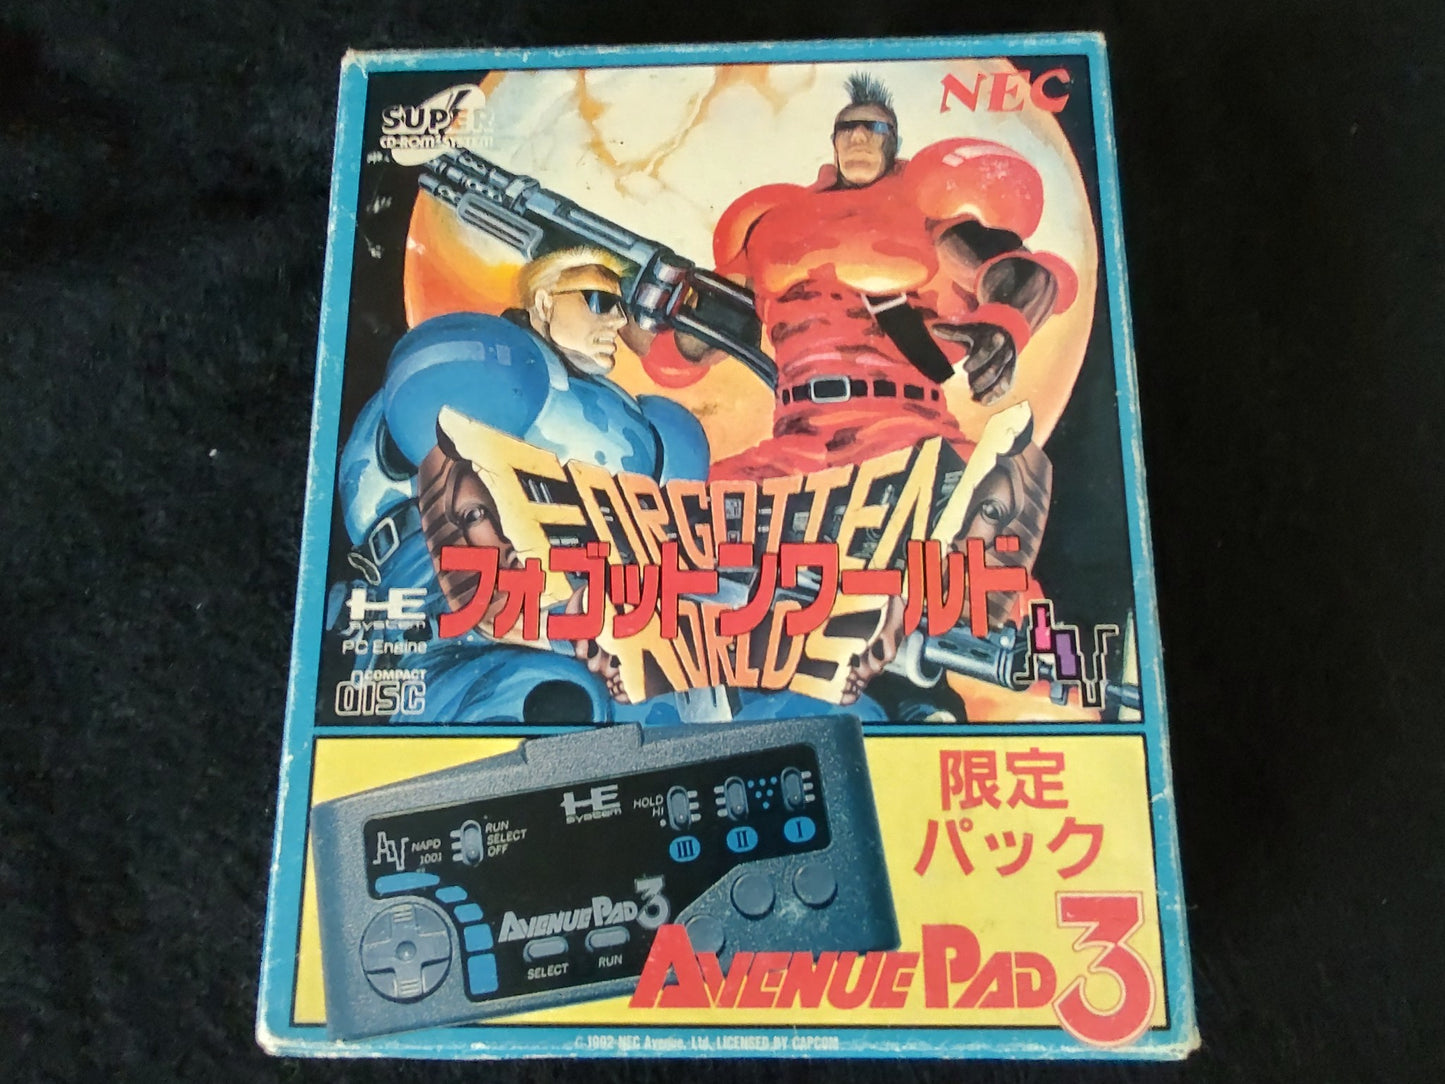 Forgotten World Avenue pad 3 Limited edition PC Engine CD-ROM2, Working-f0809-